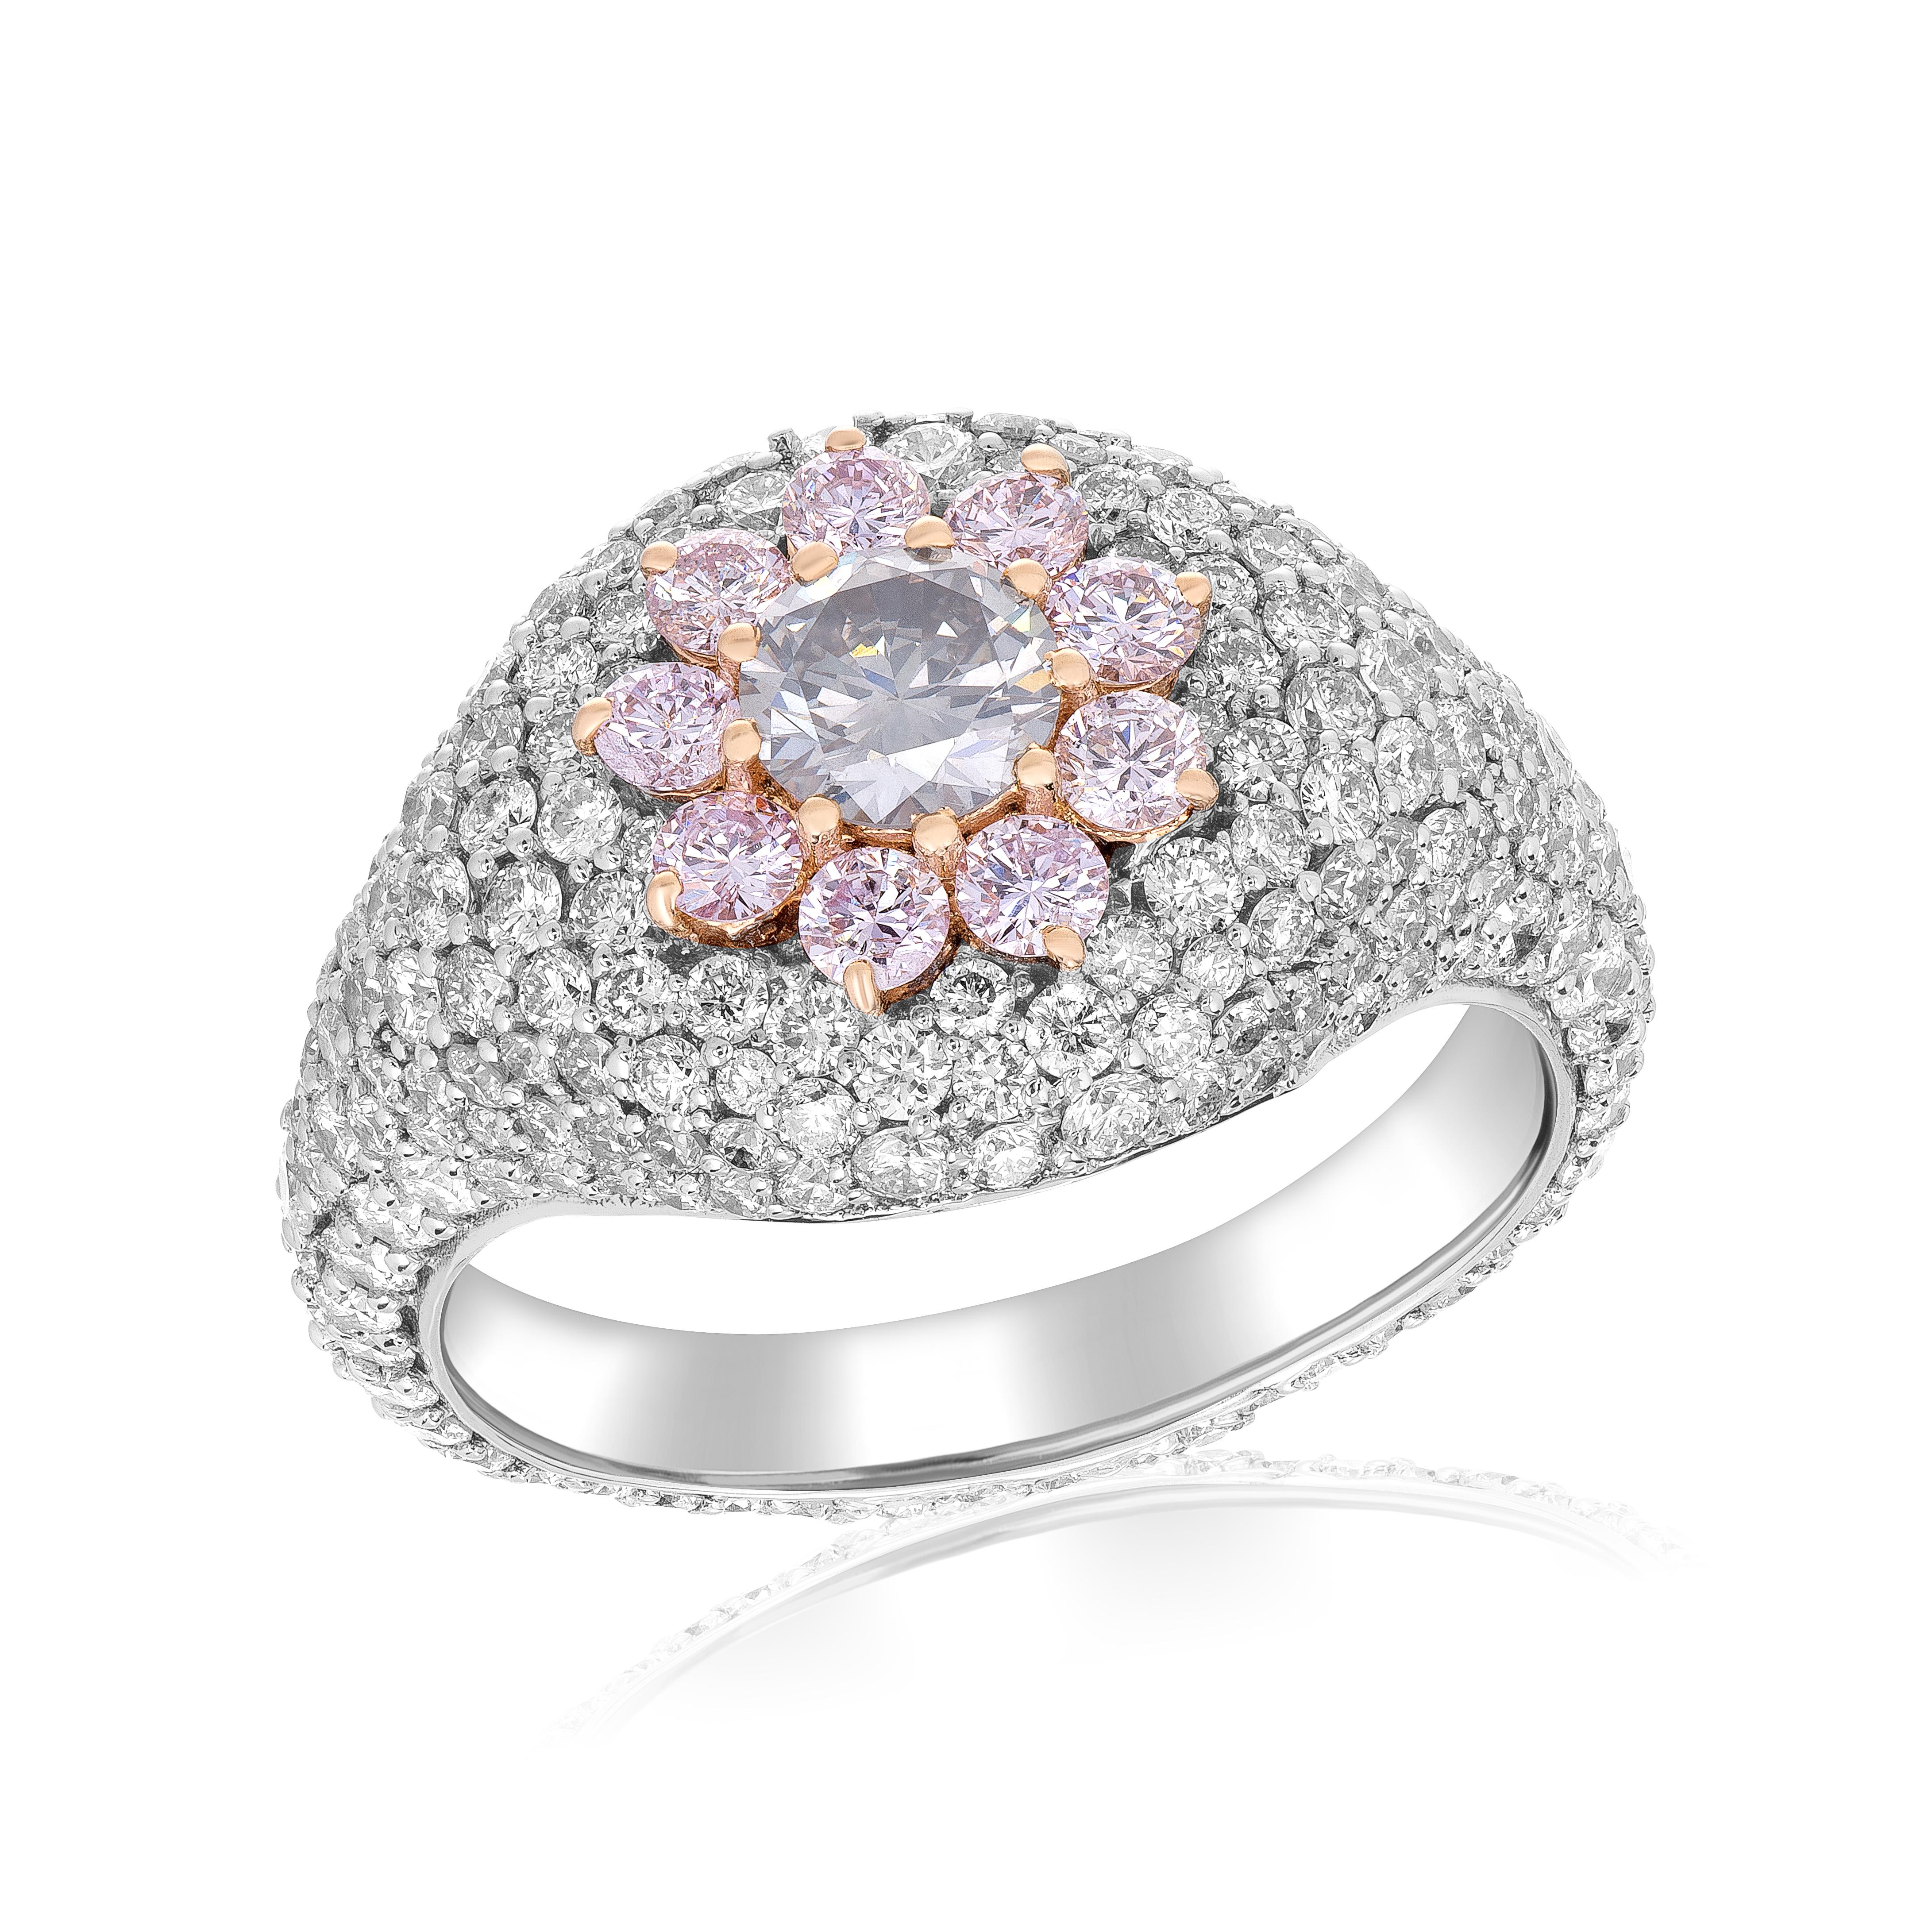 Make a statement with this stunning fashion ring that showcases a captivating fancy greyish green round diamond weighing 0.36 carats. The distinctive color of the diamond is beautifully complemented by 9 pink melee diamonds, totaling 0.36 carats,